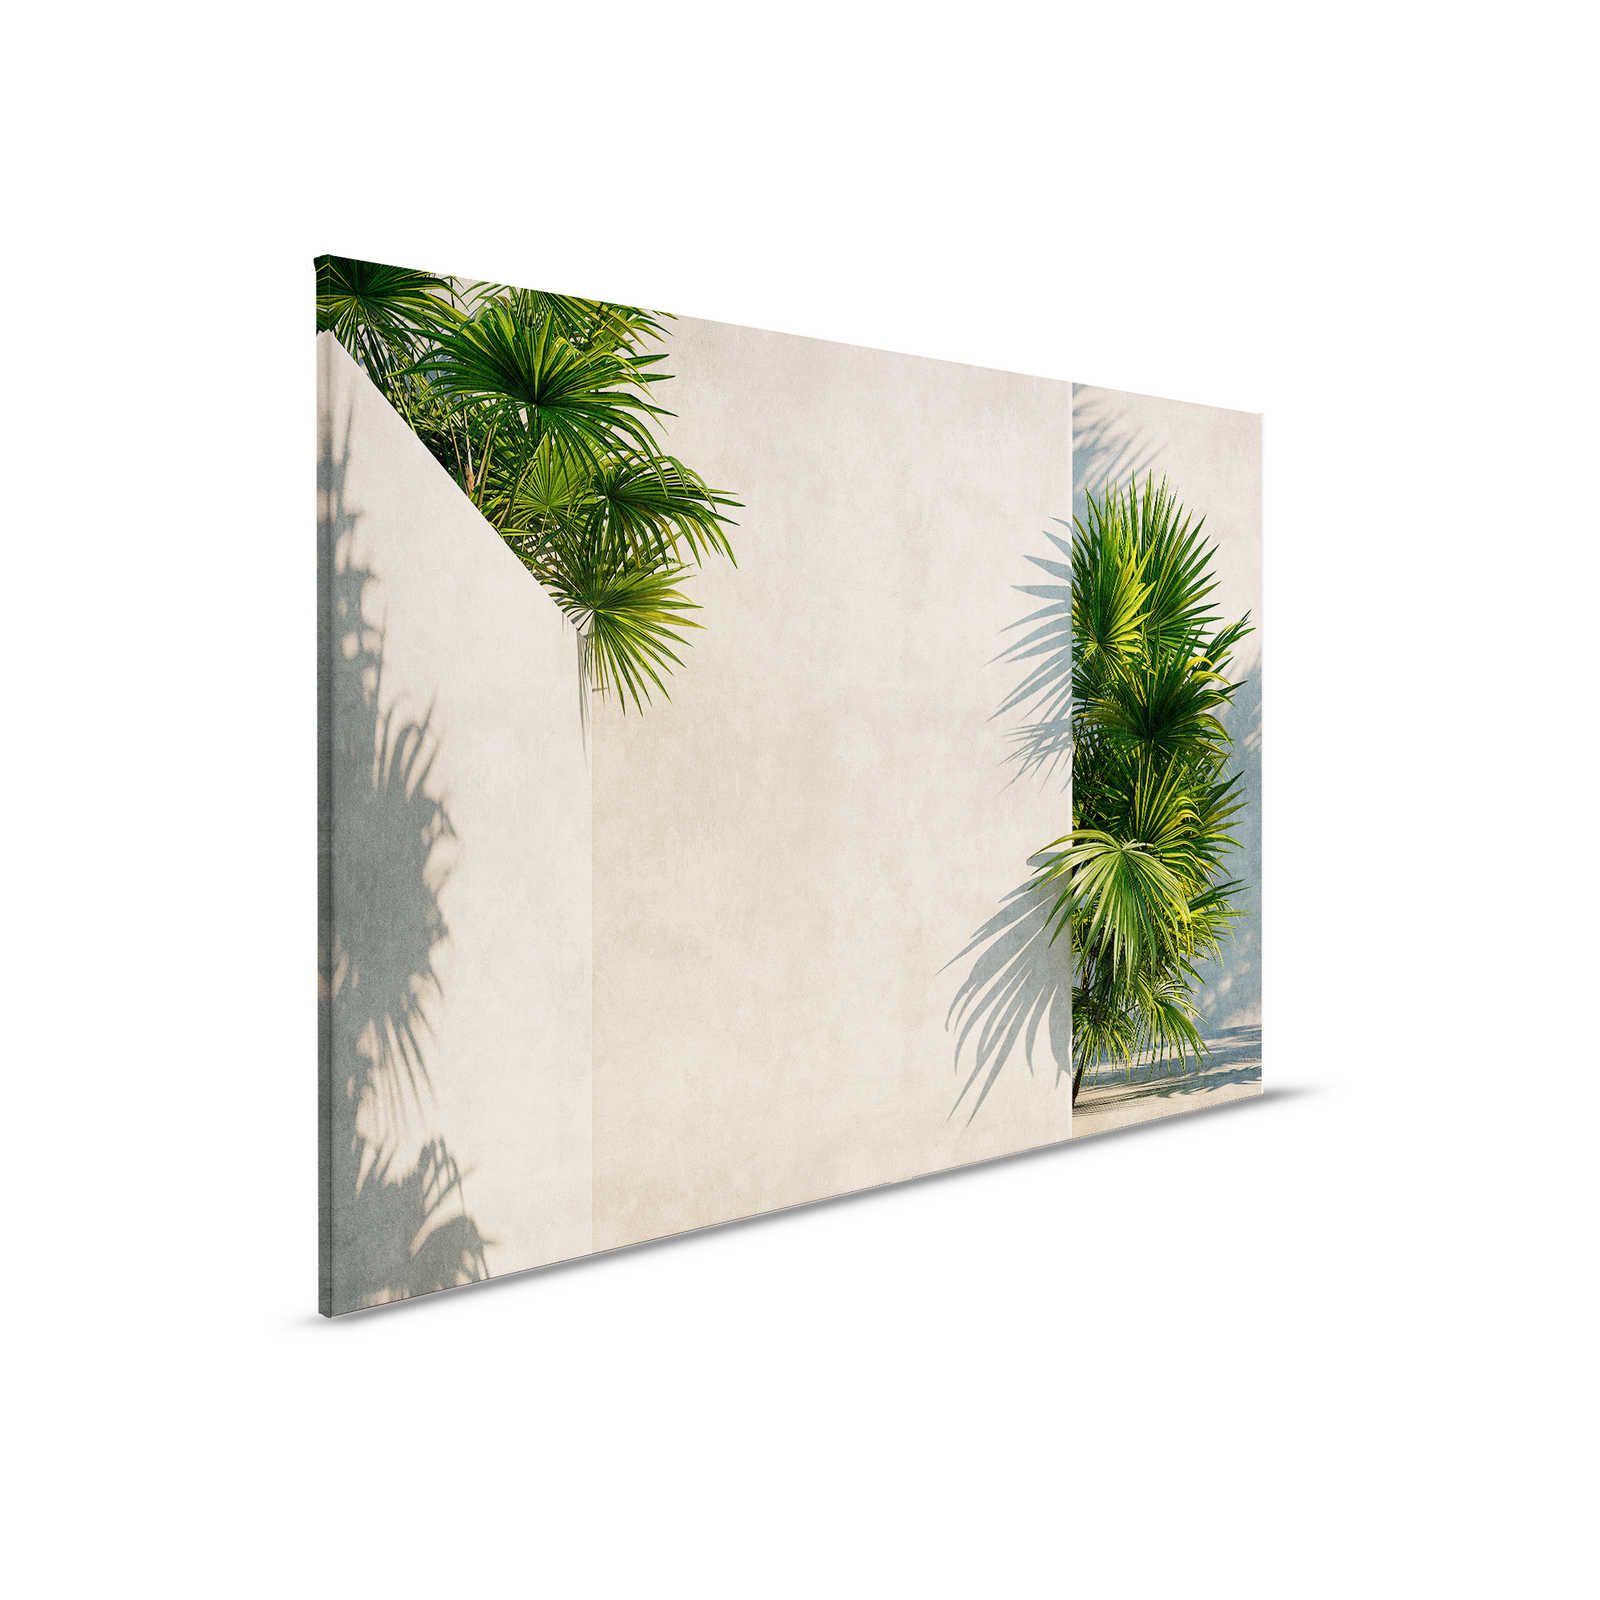         Tunis 1 - Canvas painting Palm trees in courtyard with plaster walls - 0,90 m x 0,60 m
    